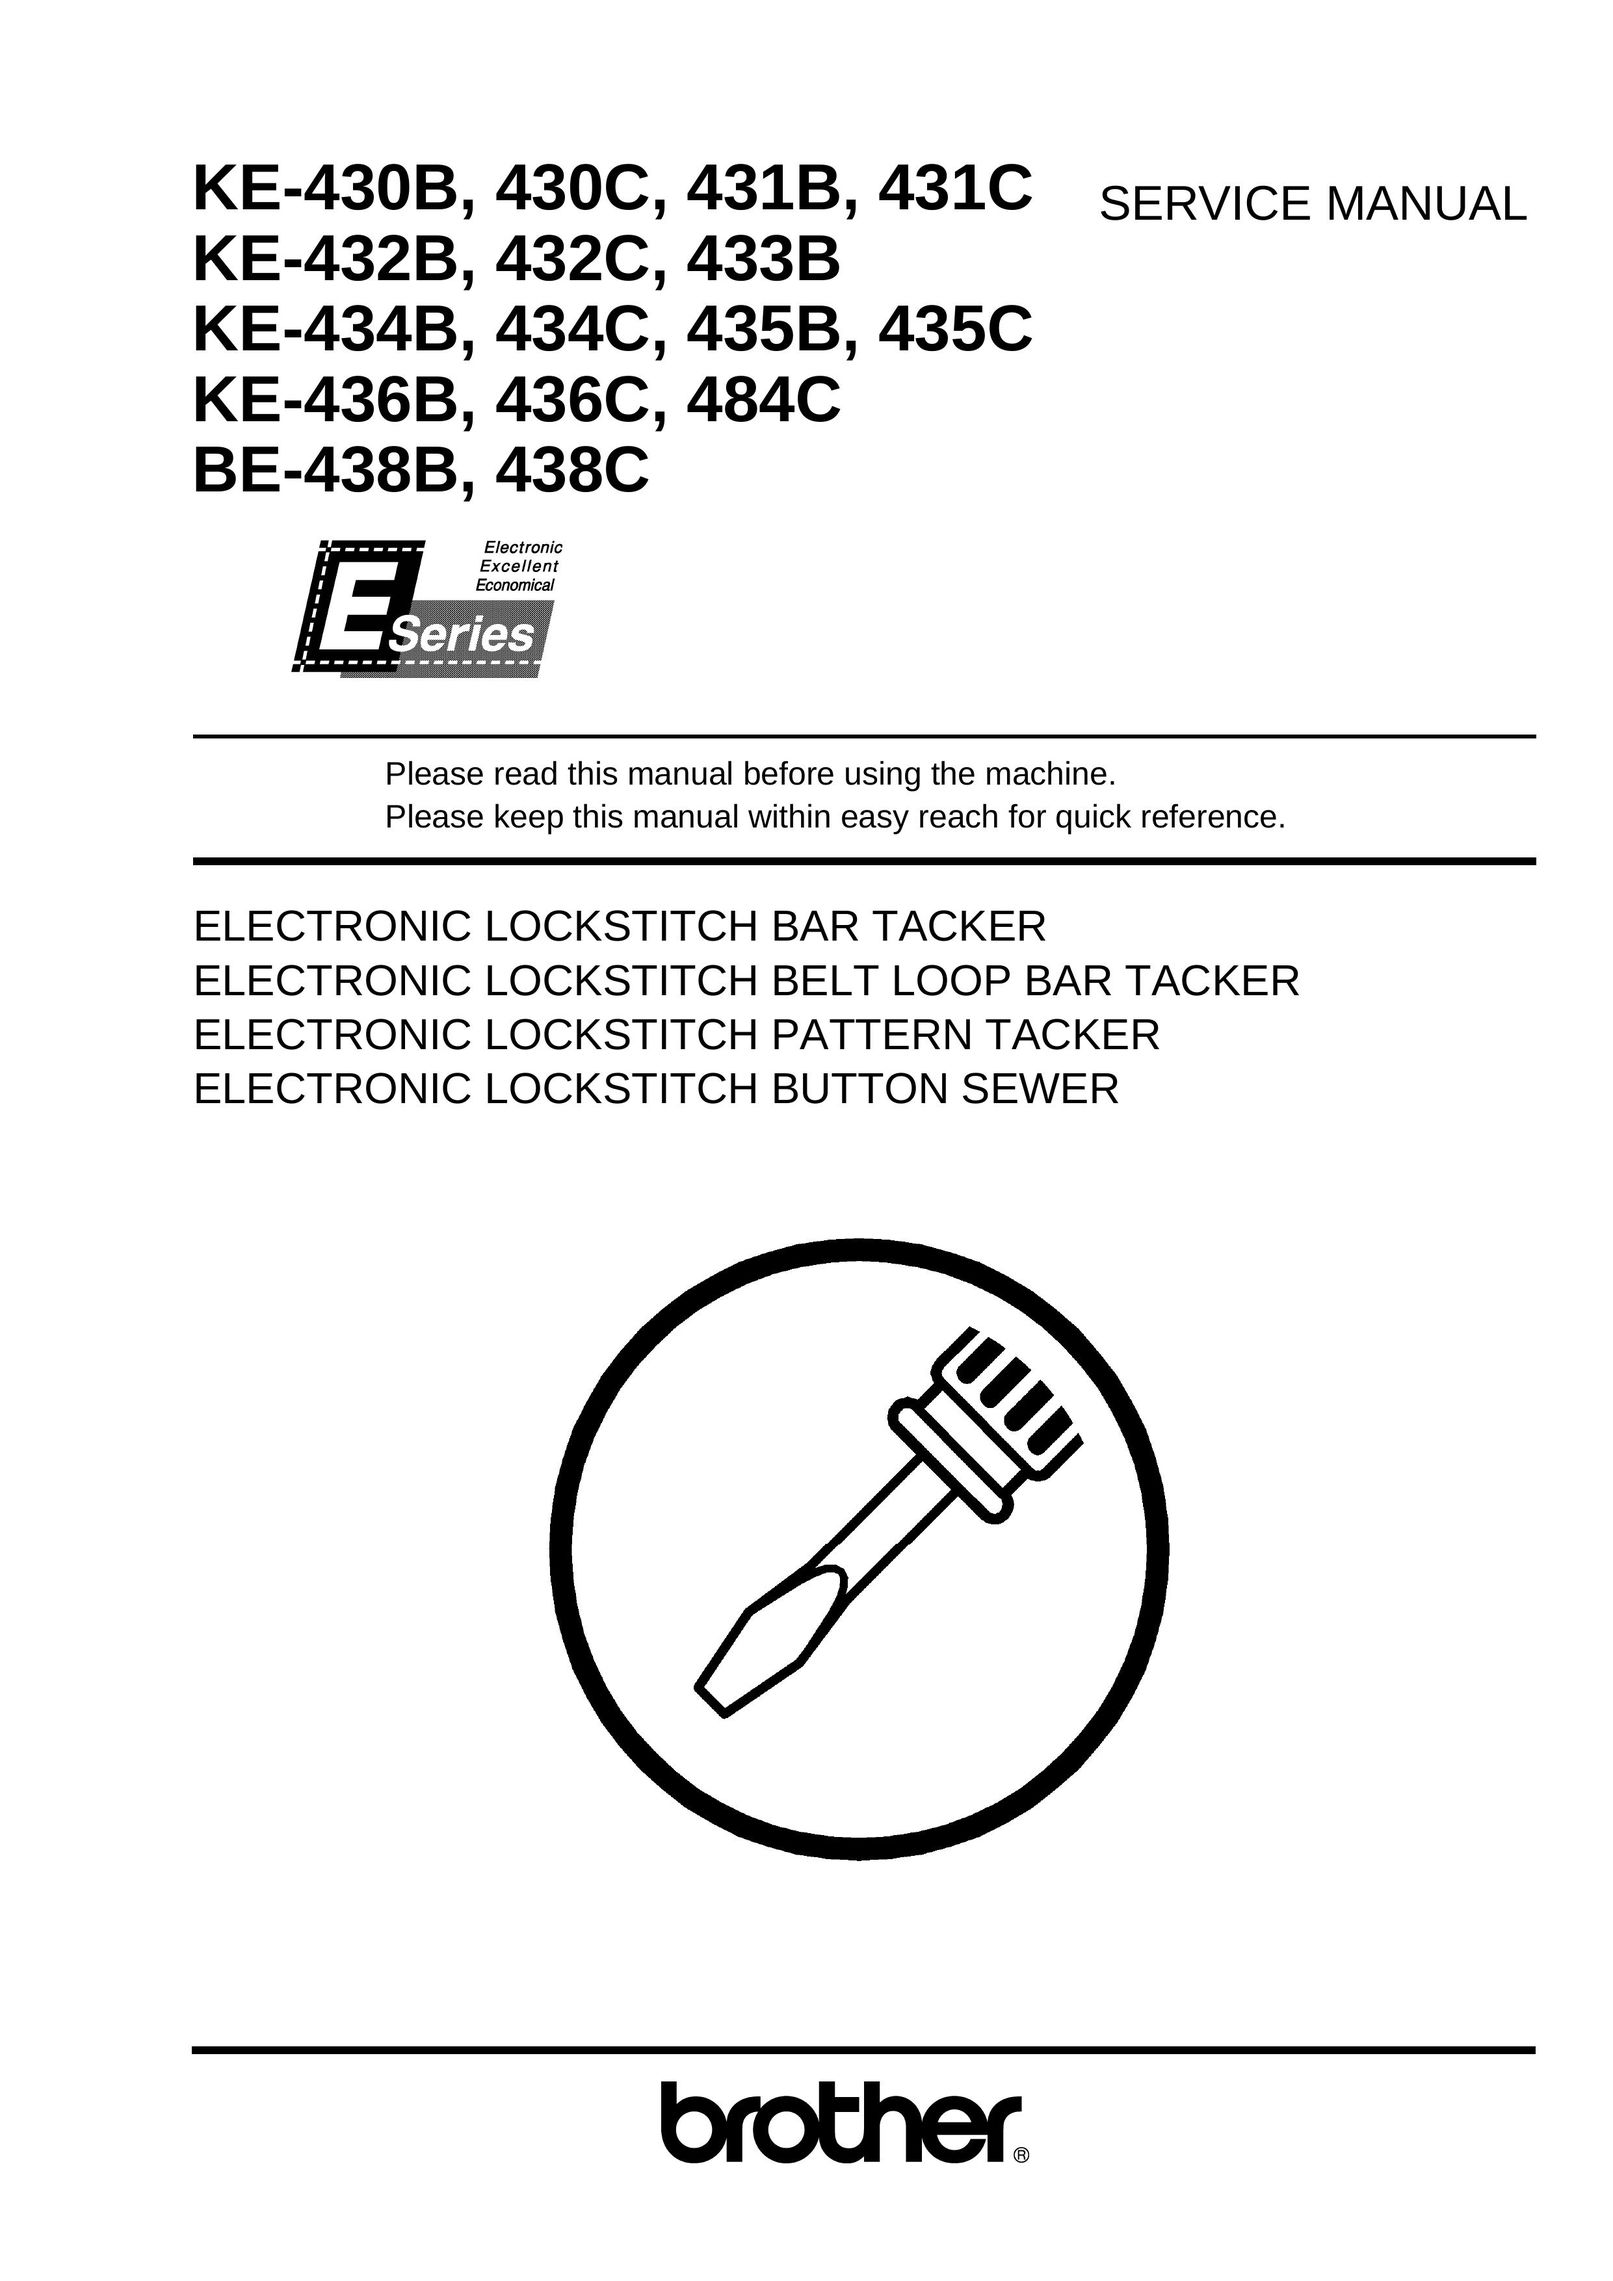 Brother 435C Sewing Machine User Manual (Page 1)